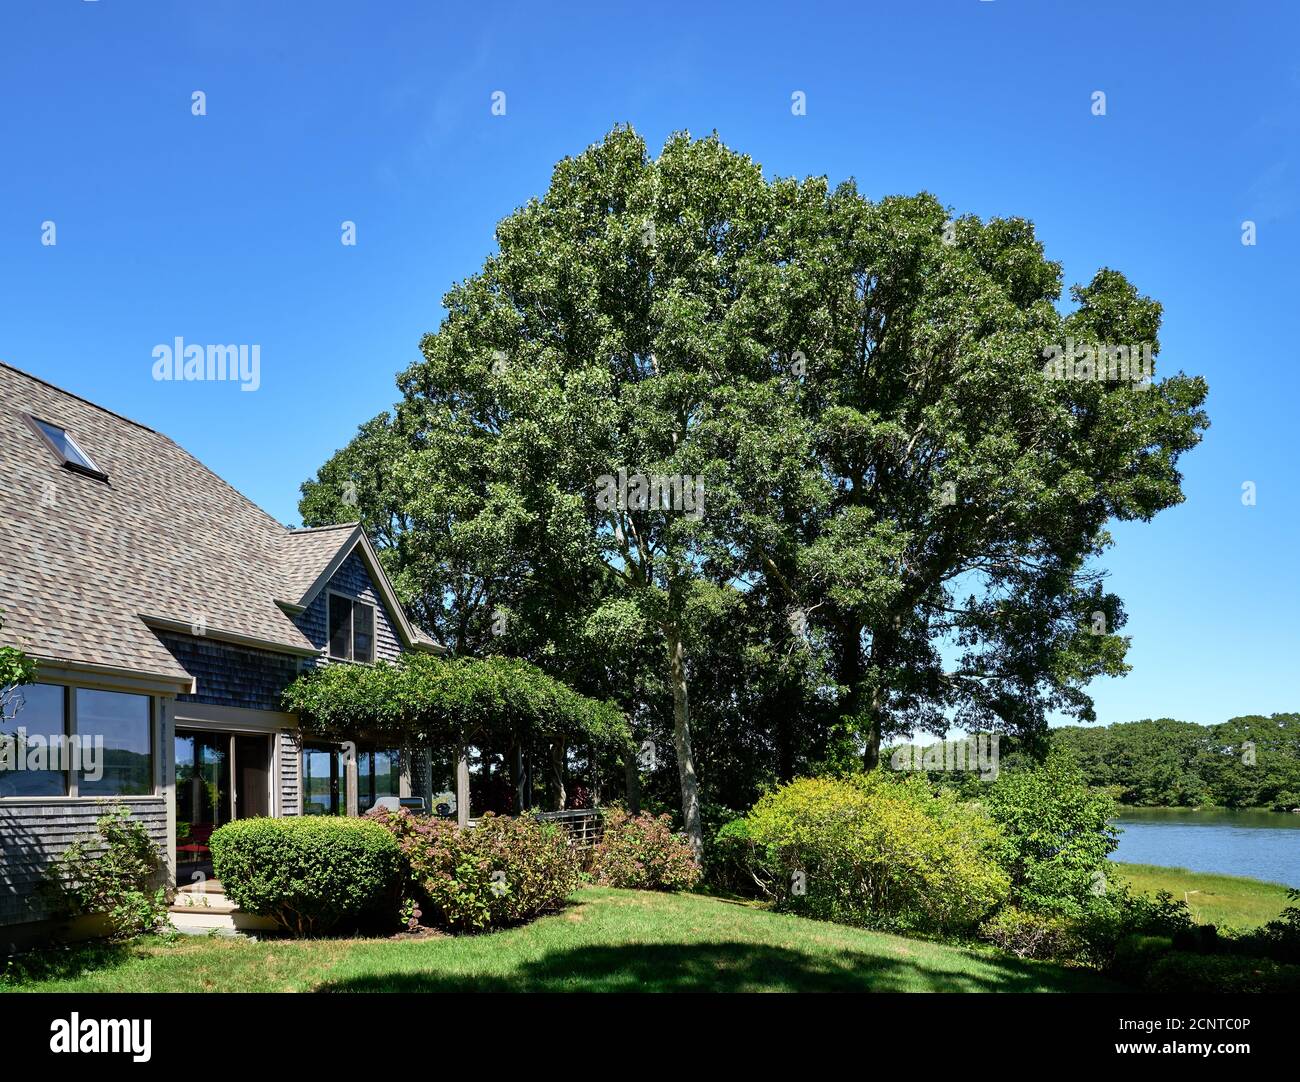 Modern shingle house and large oak tree on the shore of the river. Beautiful plantings and wisteria arbor surround the house. Stock Photo